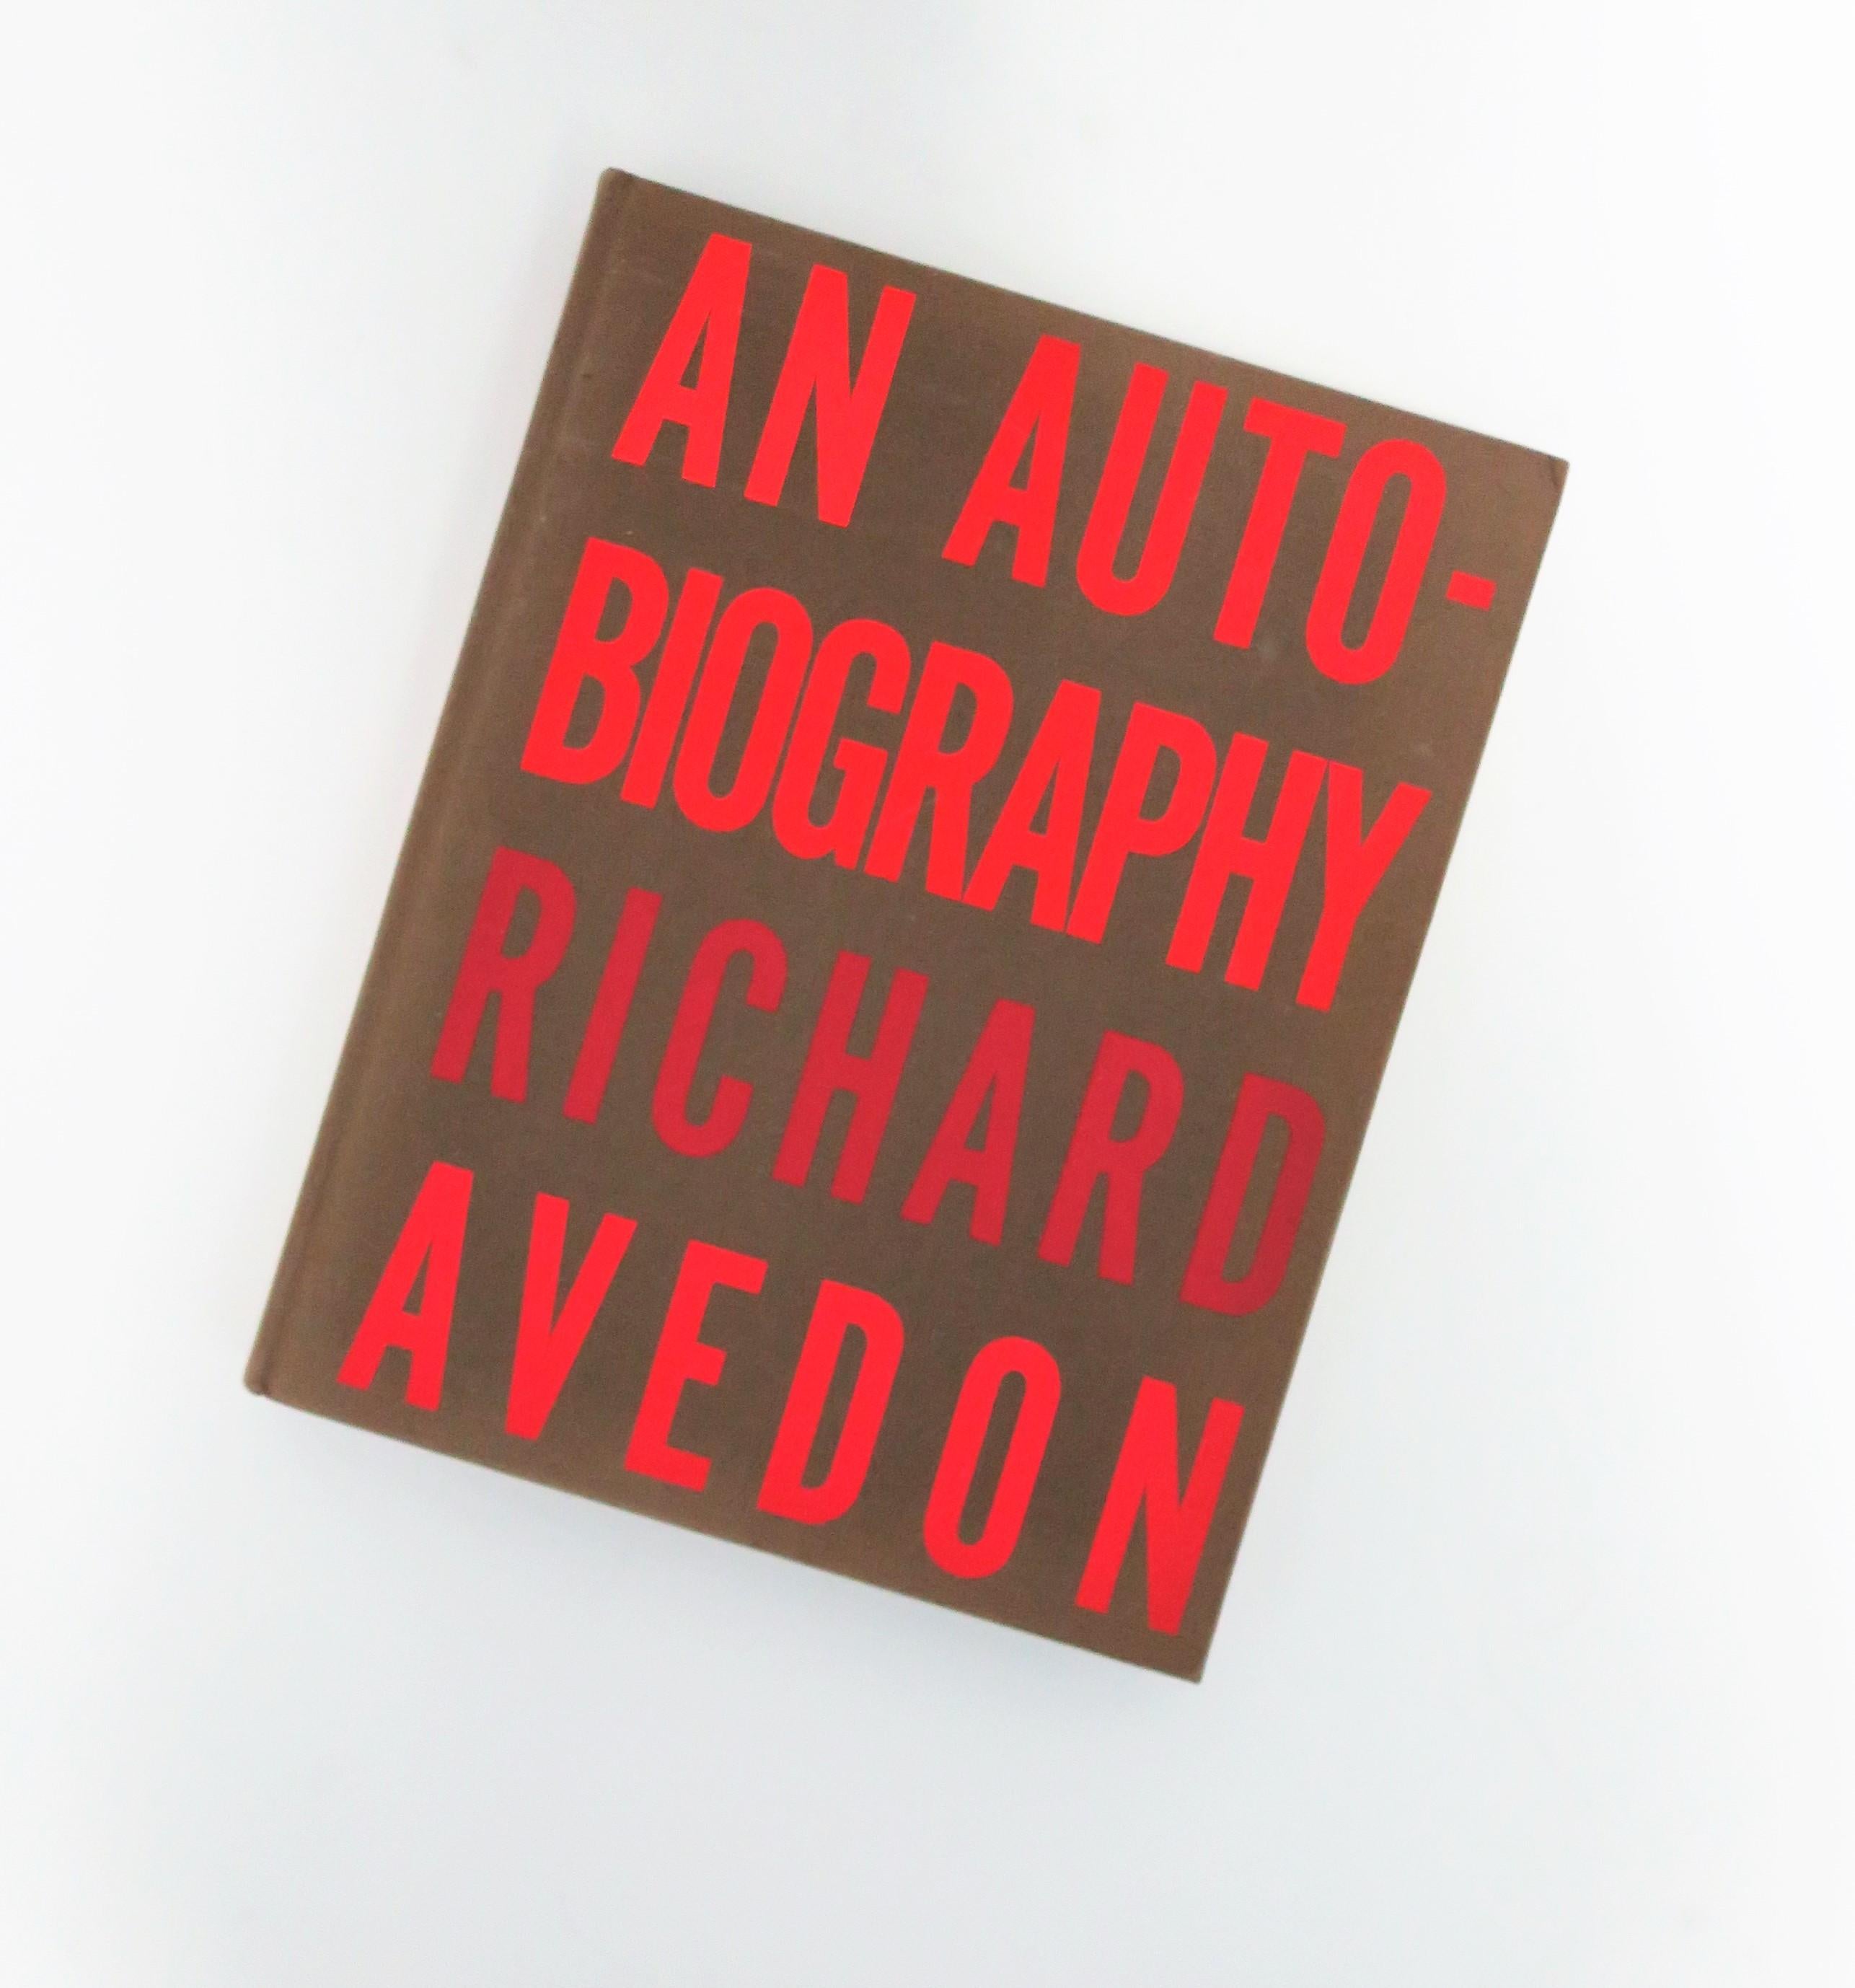 An Auto-Biography Richard Avedon 
A coffee table or library book, ca. 1990s
XXXX


Auto-Biography Richard Avedon
A beautiful and large-scale coffee table or library book by Richard Avedon, 1993. Photographic prints are made on Eastman Kodak